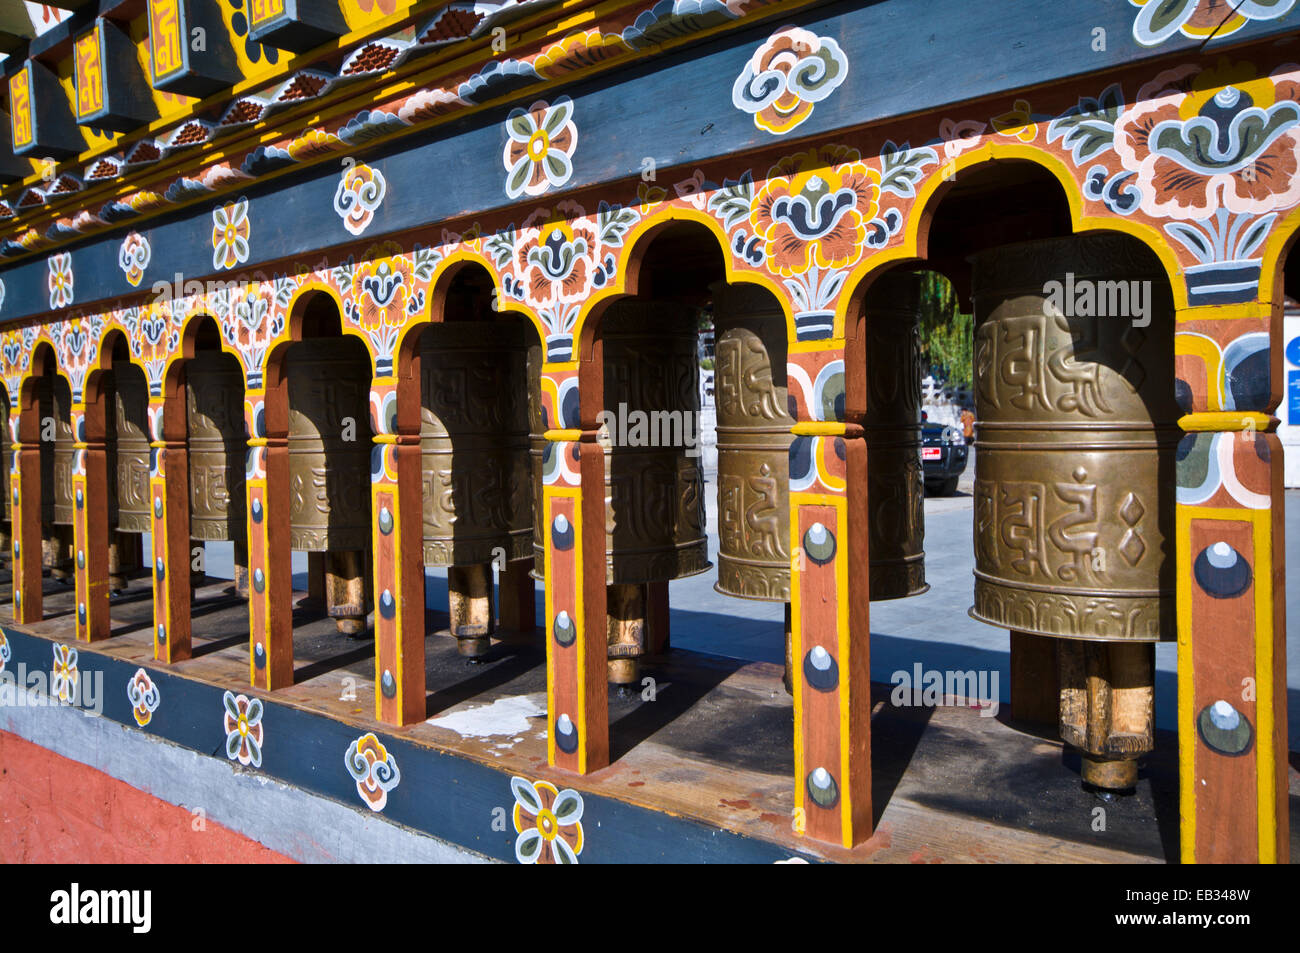 Religious symbols on a spinning brass prayer wheels in a Himalayan town square. Stock Photo